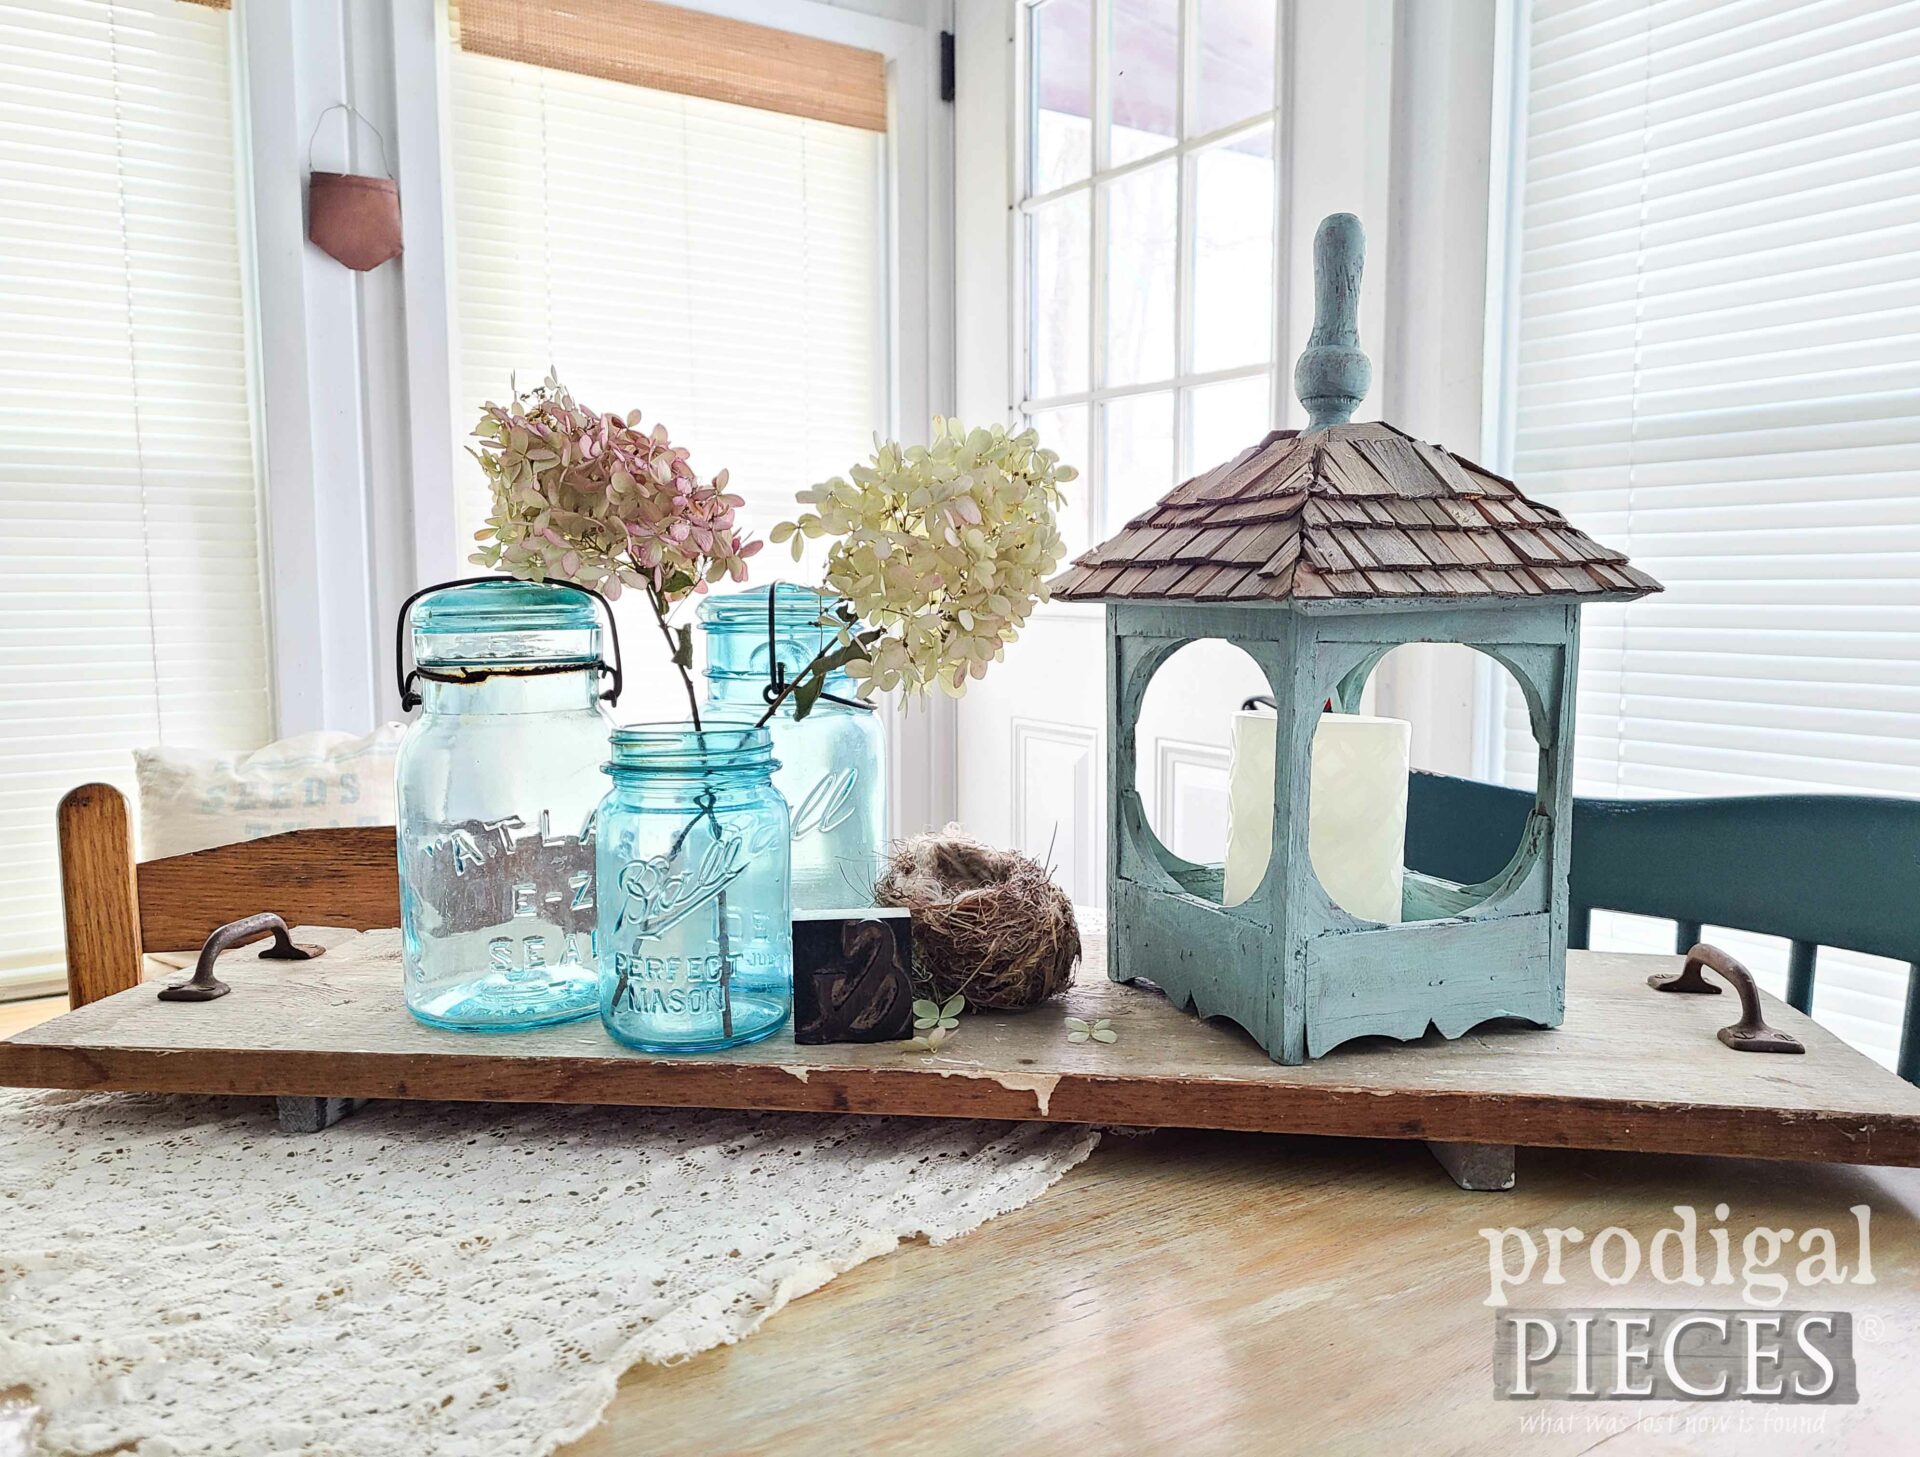 DIY Thrifted Wooden Lantern Makeover by Larissa of Prodigal Pieces | prodigalpieces.com #prodigalpieces #farmhouse #thrifted #diy